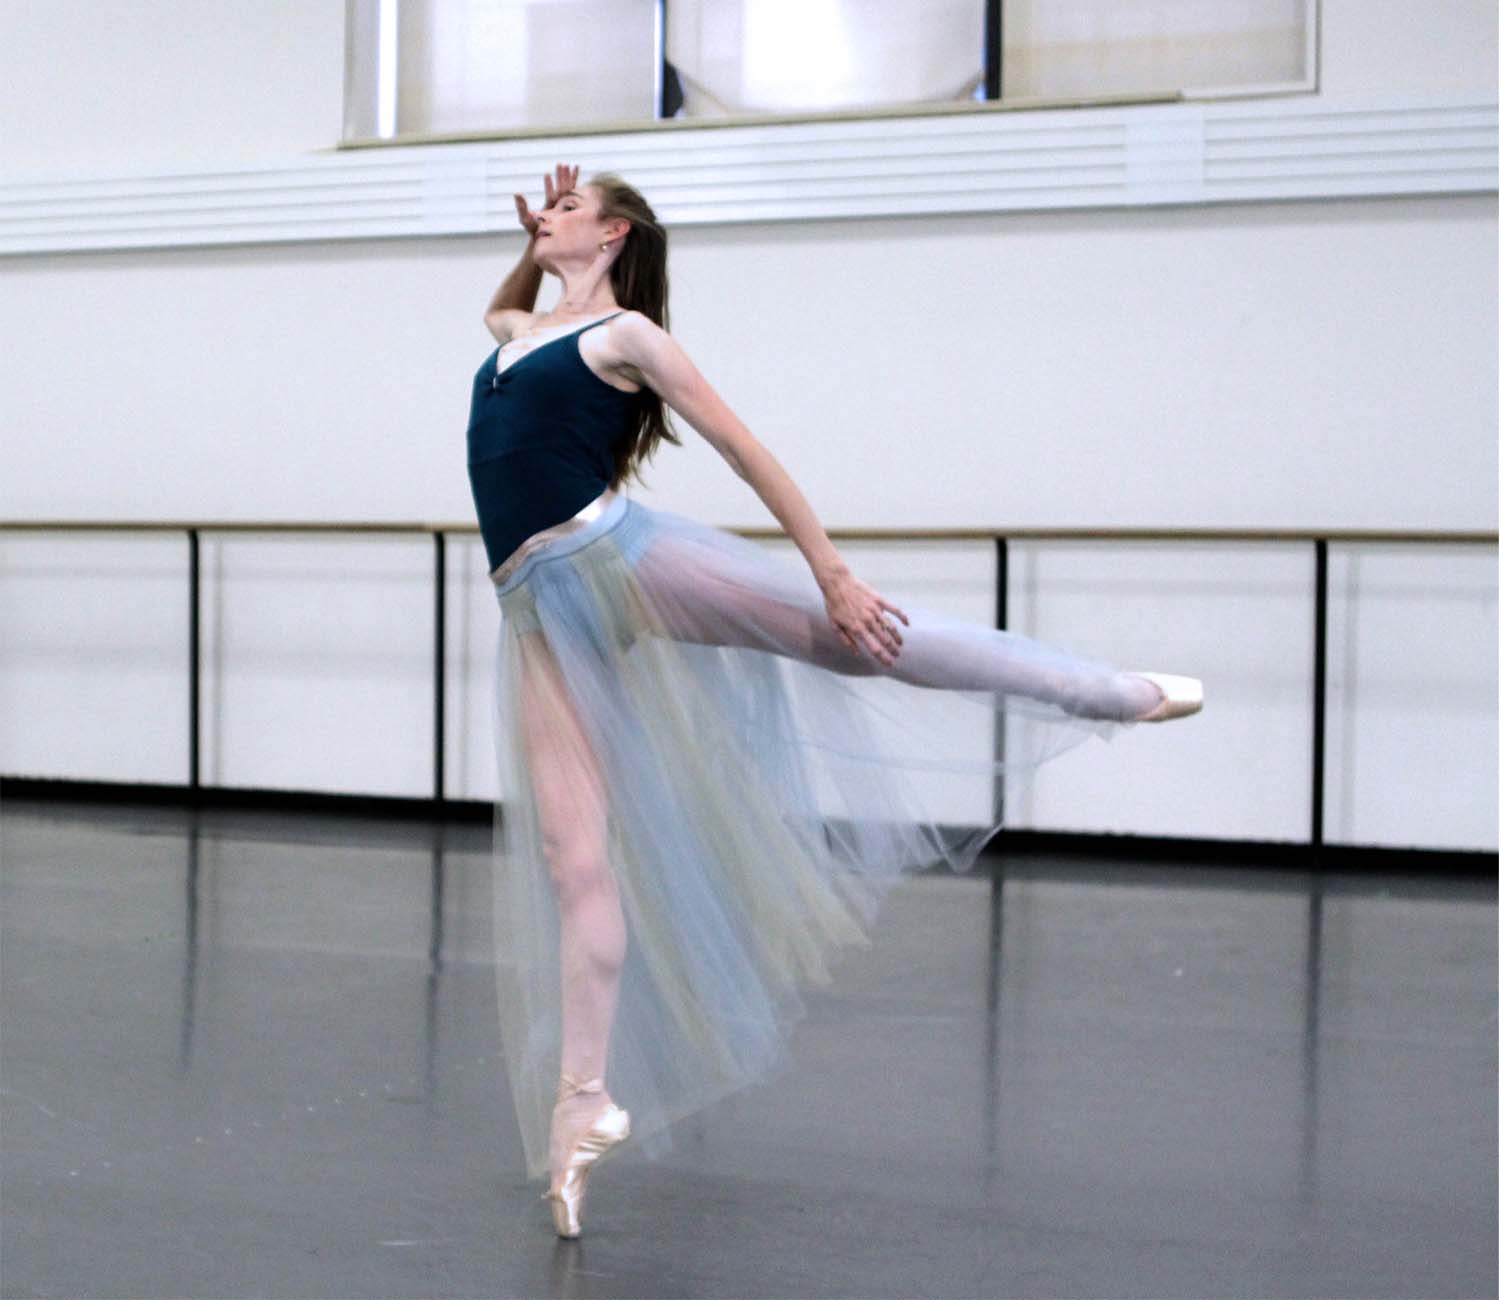 Ashley Laracey wearing a blue tulle skirt in an arabesque rehearsing Hermia in A Midsummer Night's Dream